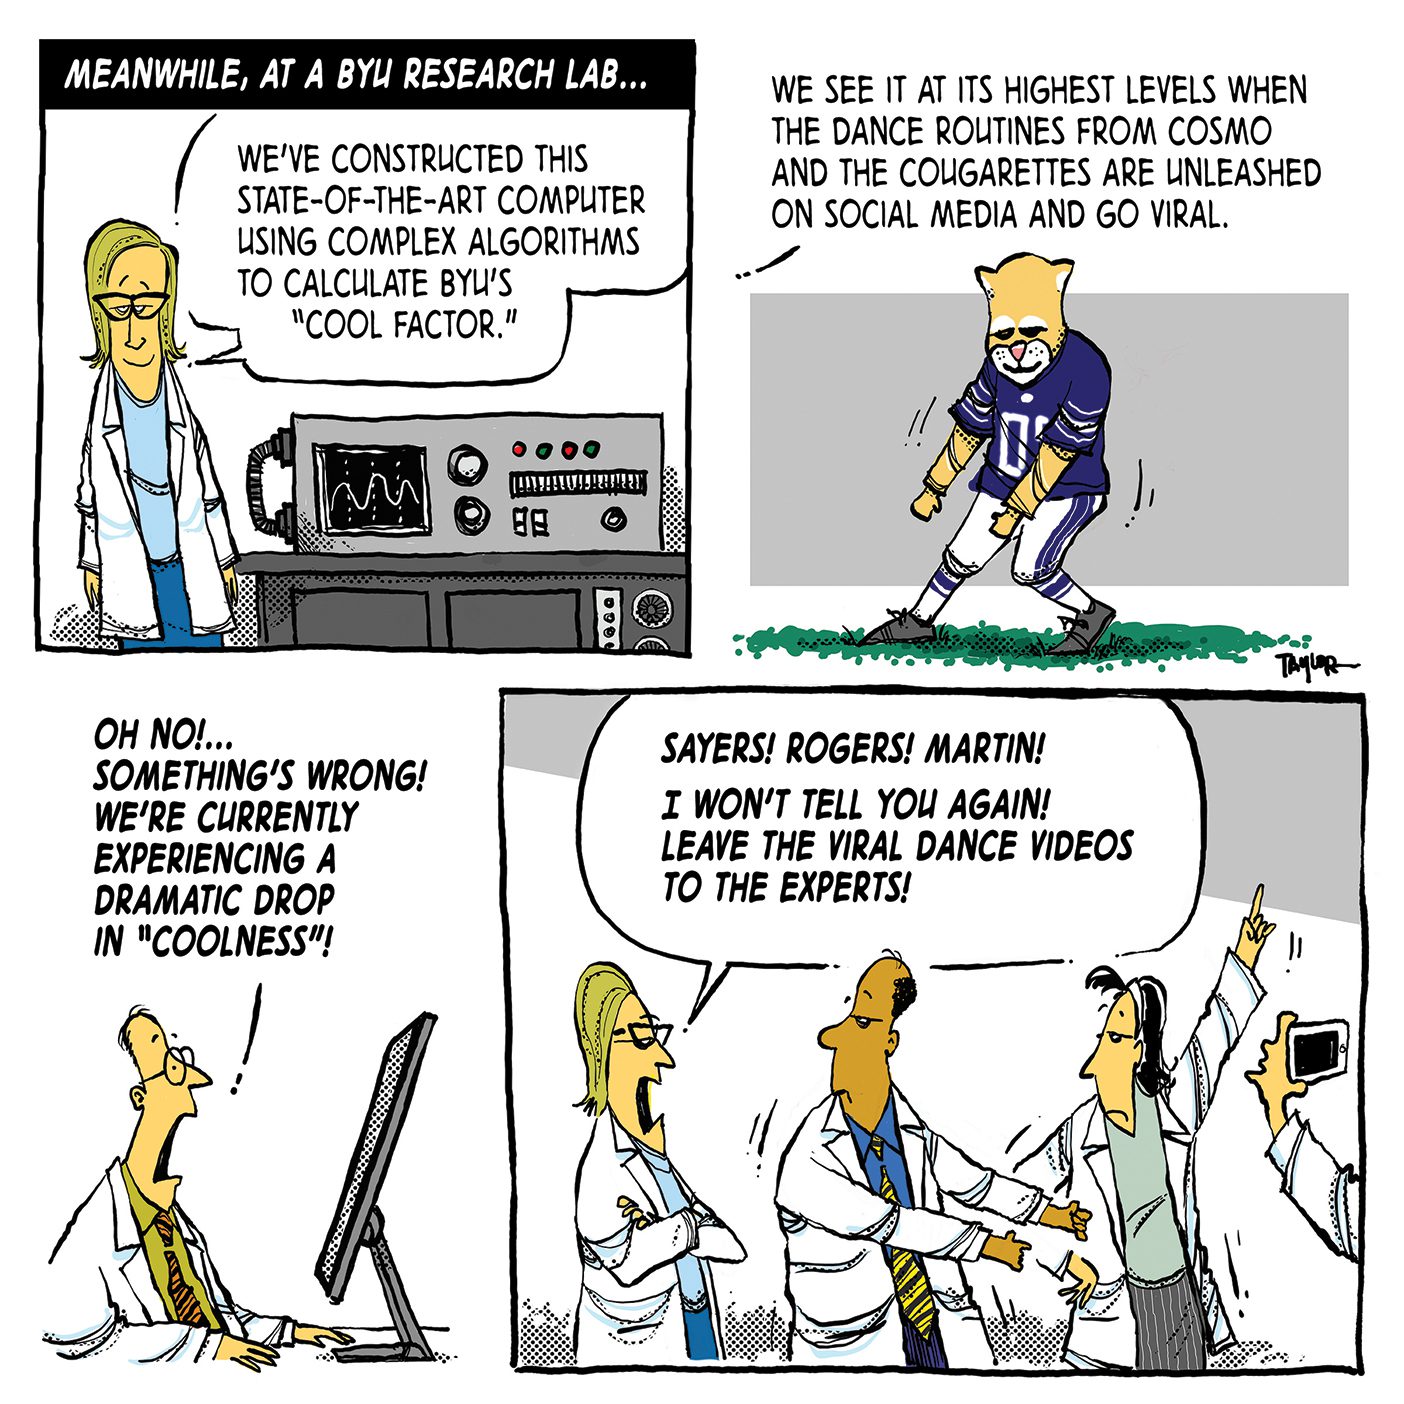 A comic; the first panel reads "Meanwhile, at a BYU research lab . . . " and shows a woman in a lab coat and glasses standing next to a machine. The scientist says, "We've constructed this state-of-the-art computer using complex algorithms to calculate BYU's "cool factor."" In the next panel, Cosmo is dancing on the football field. The scientist continues speaking, saying "We see it at its highest levels when the dance routines from Cosmo and the Cougarettes are unleashed on social media and go viral." The third panel shows a different scientist looking panicked while sitting at a computer. He says, "On no! . . . Something's wrong! We're currently experiencing a dramatic drop in "coolness"!" The fourth and final panel shows two scientists dancing and another scientist filming them. The scientist from the first panel stands by them with her arms folded saying "Sayers! Rogers! Martin! I won't tell you again! Leave the viral dance videos to the experts!"